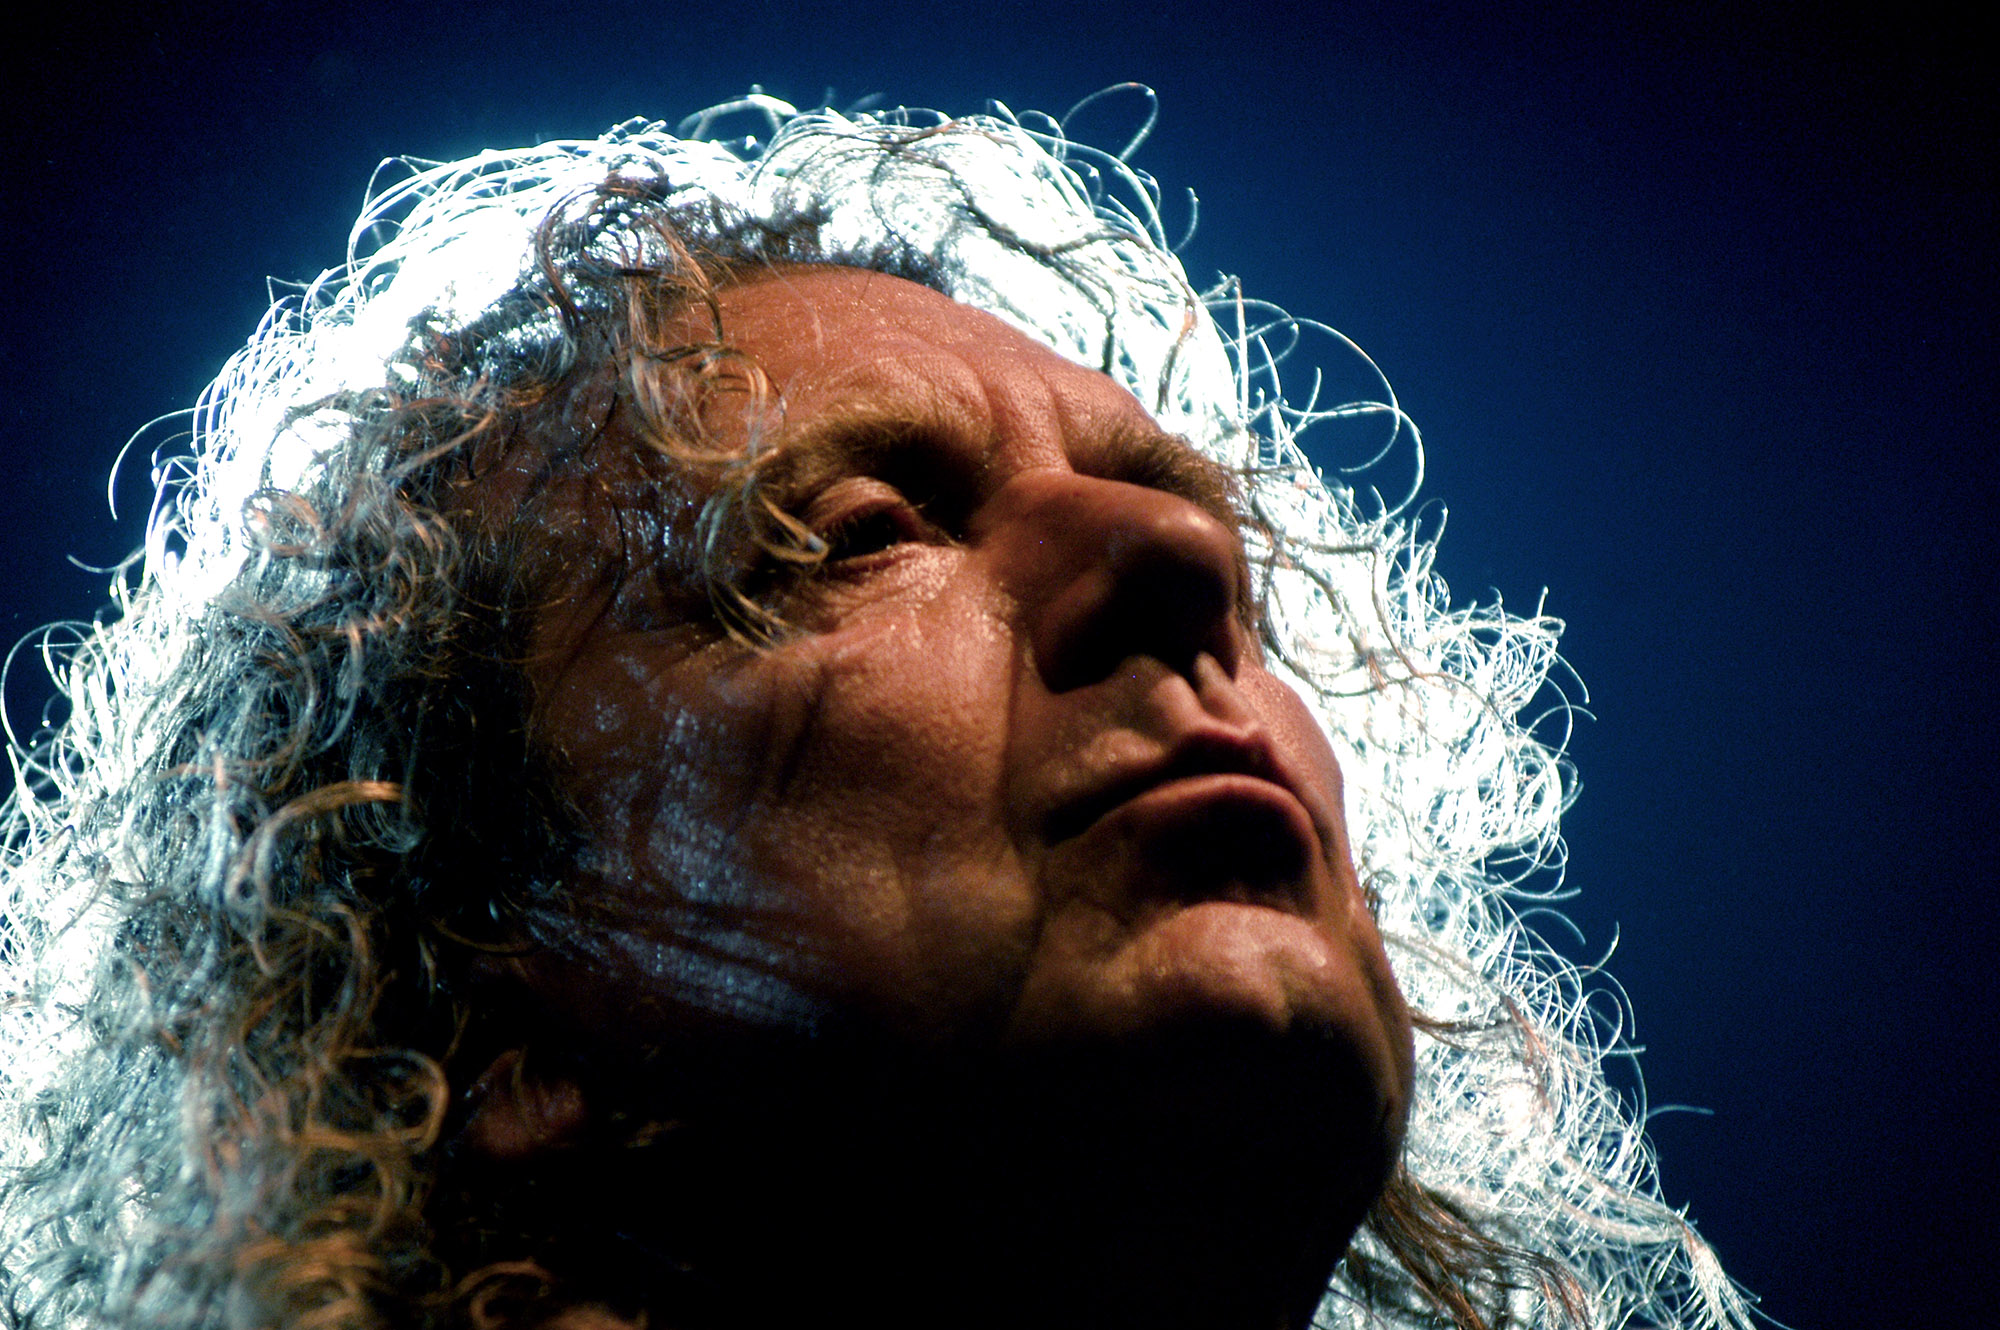 Milan Italy, 11 July 2003, live concert of Robert Plant ,Dreamland Tour 2003 at the Madzapalace: The singer Robert Plant during the concert